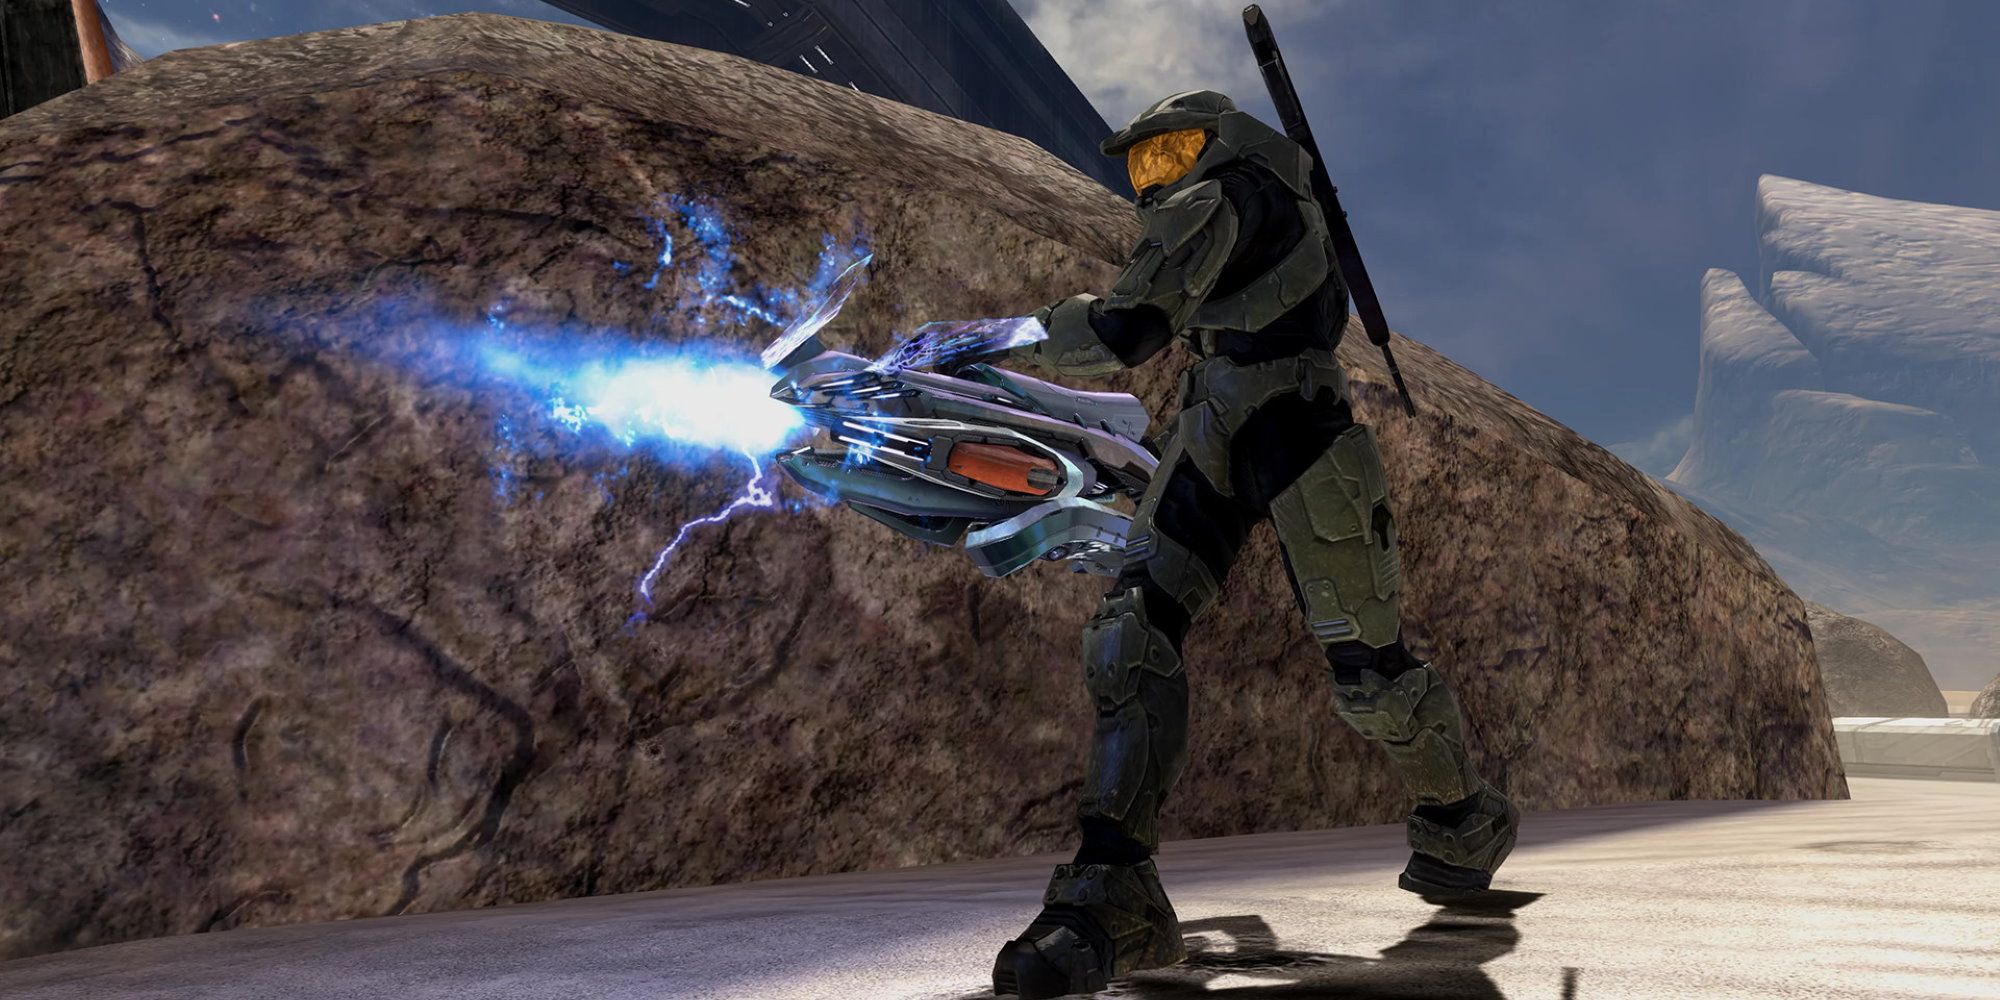 Halo servers for Xbox 360 games shutting down next month - Polygon